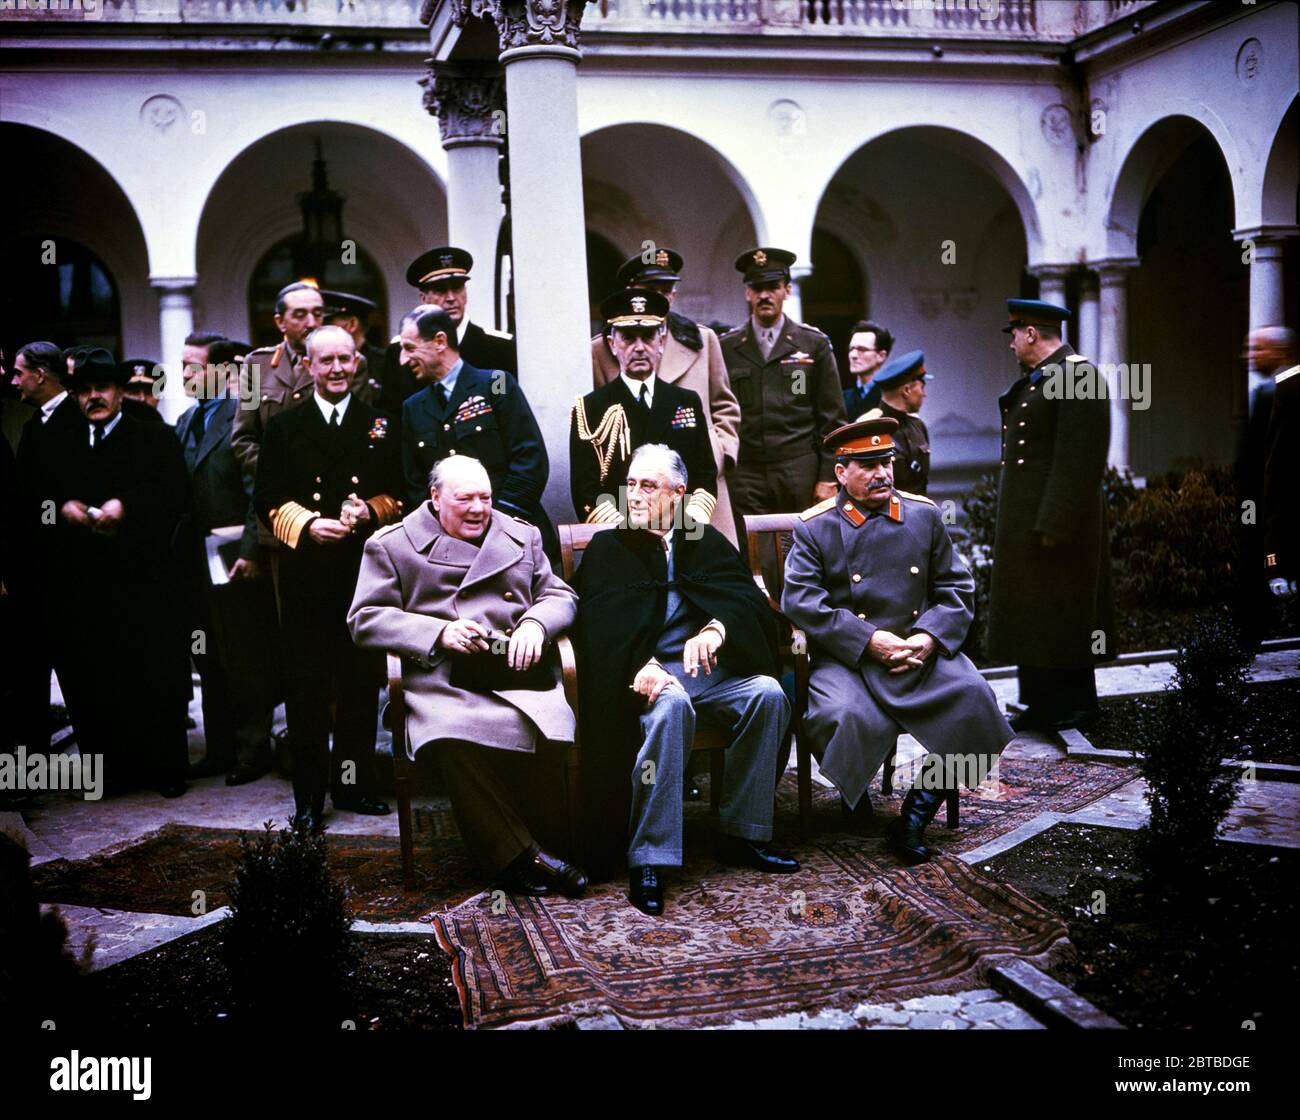 1945 , february, YALTA, CRIMEA, RUSSIA :The Yalta Conference was the World War II meeting of the heads of government of the United States, the United Kingdom, and the Soviet Union. With (from left to right) Winston Churchill , Franklin Delano Roosevelt and Joseph Stalin . Also present are USSR Foreign Minister Vyacheslav Molotov (far right), Field Marshal Alan Brooke , Admiral of the Fleet Sir Andrew Cunningham ,  Marshal of the RAF Sir Charles Portal  (standing behind Churchill), George Marshall , Army Chief of Staff and Fleet Admiral William D. Leahy (standing behind Roosevelt). Far Left: Si Stock Photo